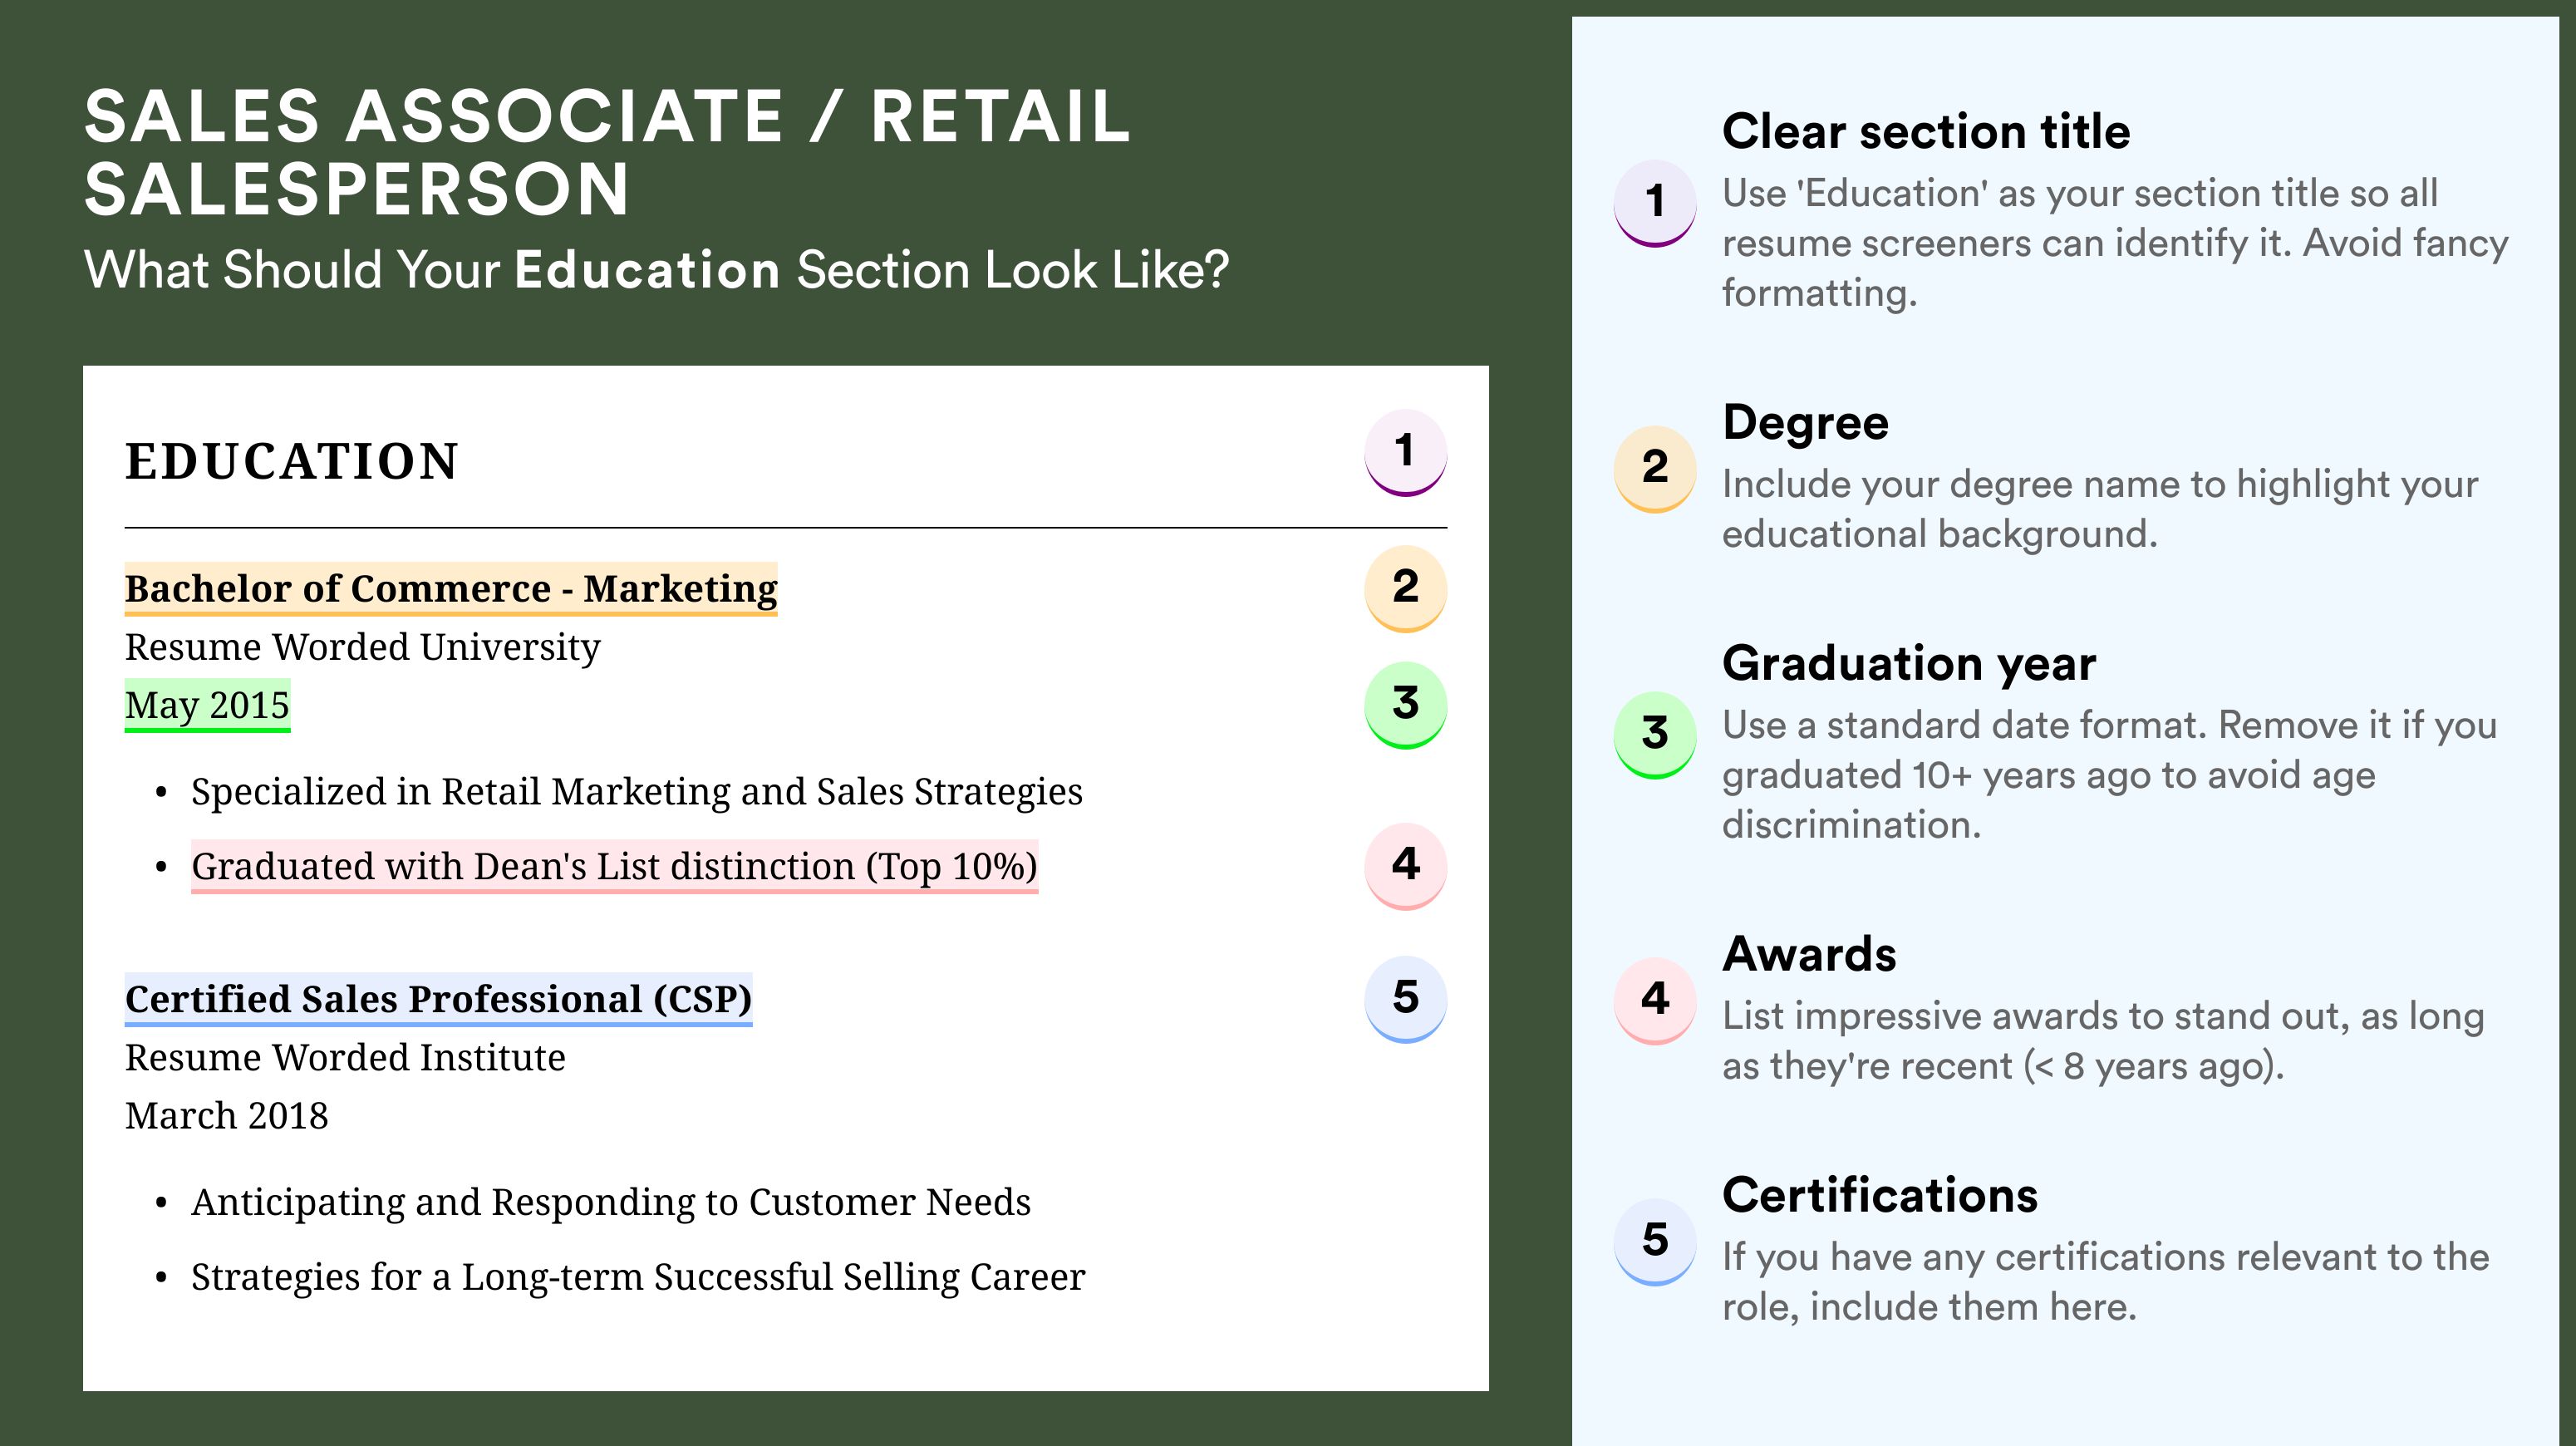 How To Write An Education Section - Sales Associate / Retail Salesperson Roles